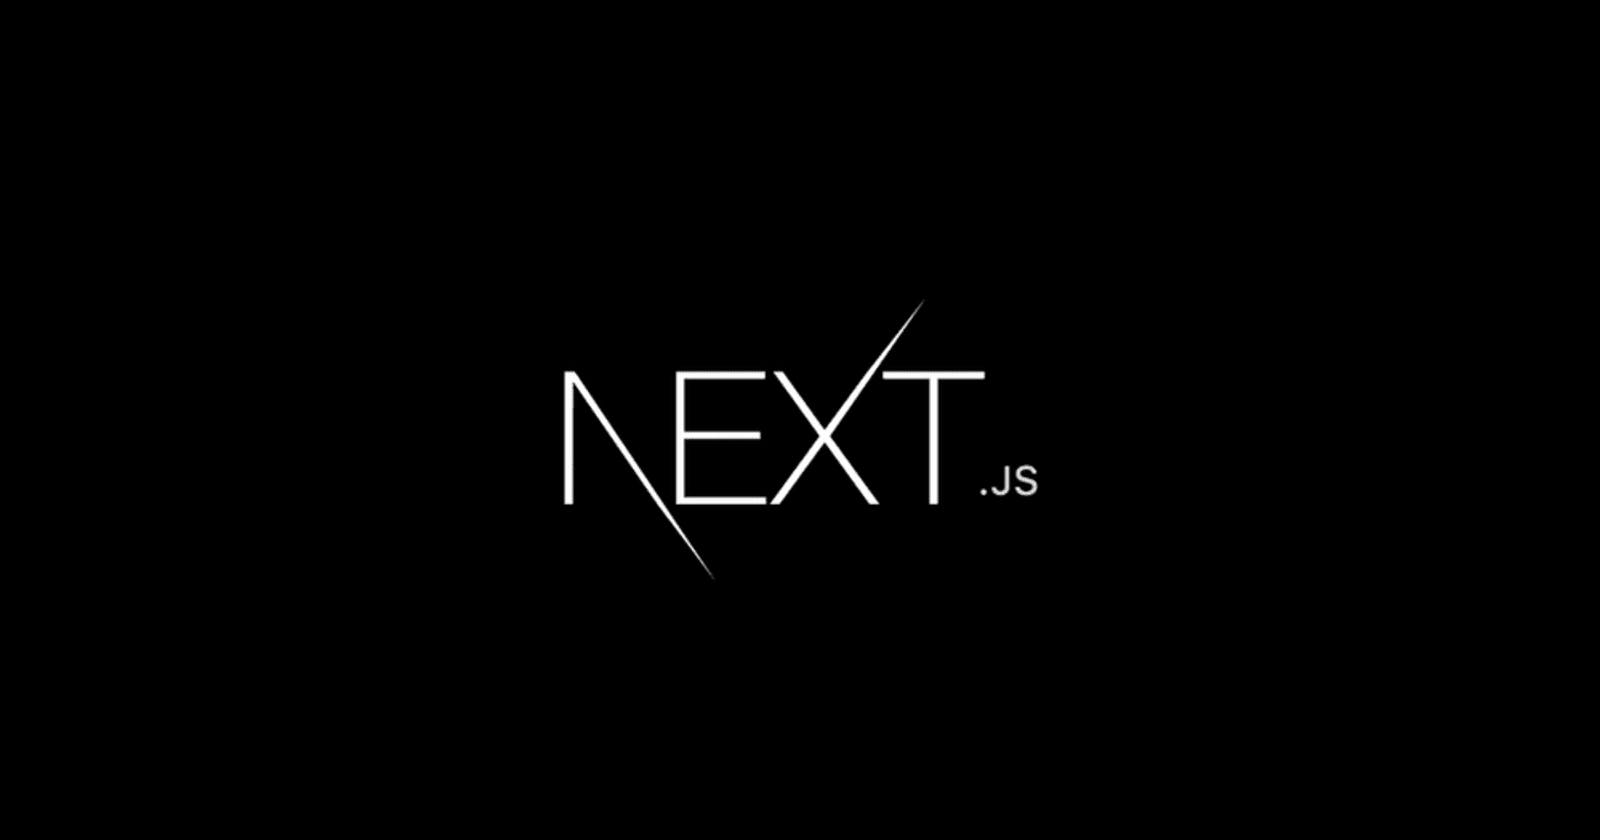 Next.js: Building Powerful Web Applications with Ease